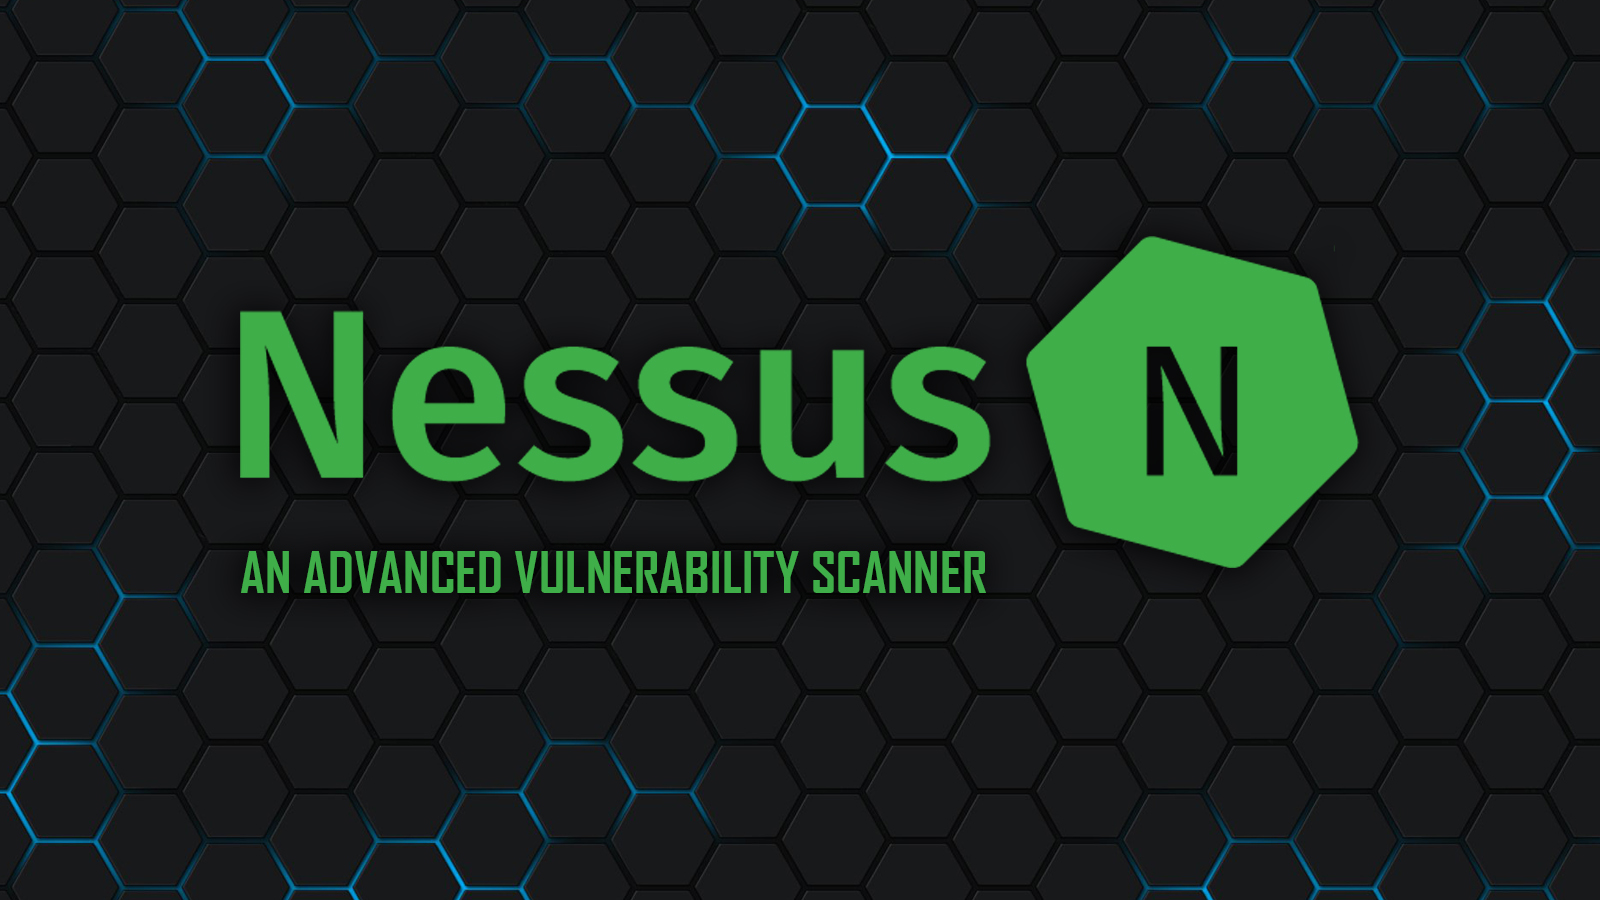 Nessus - An Advanced Vulnerability Scanner